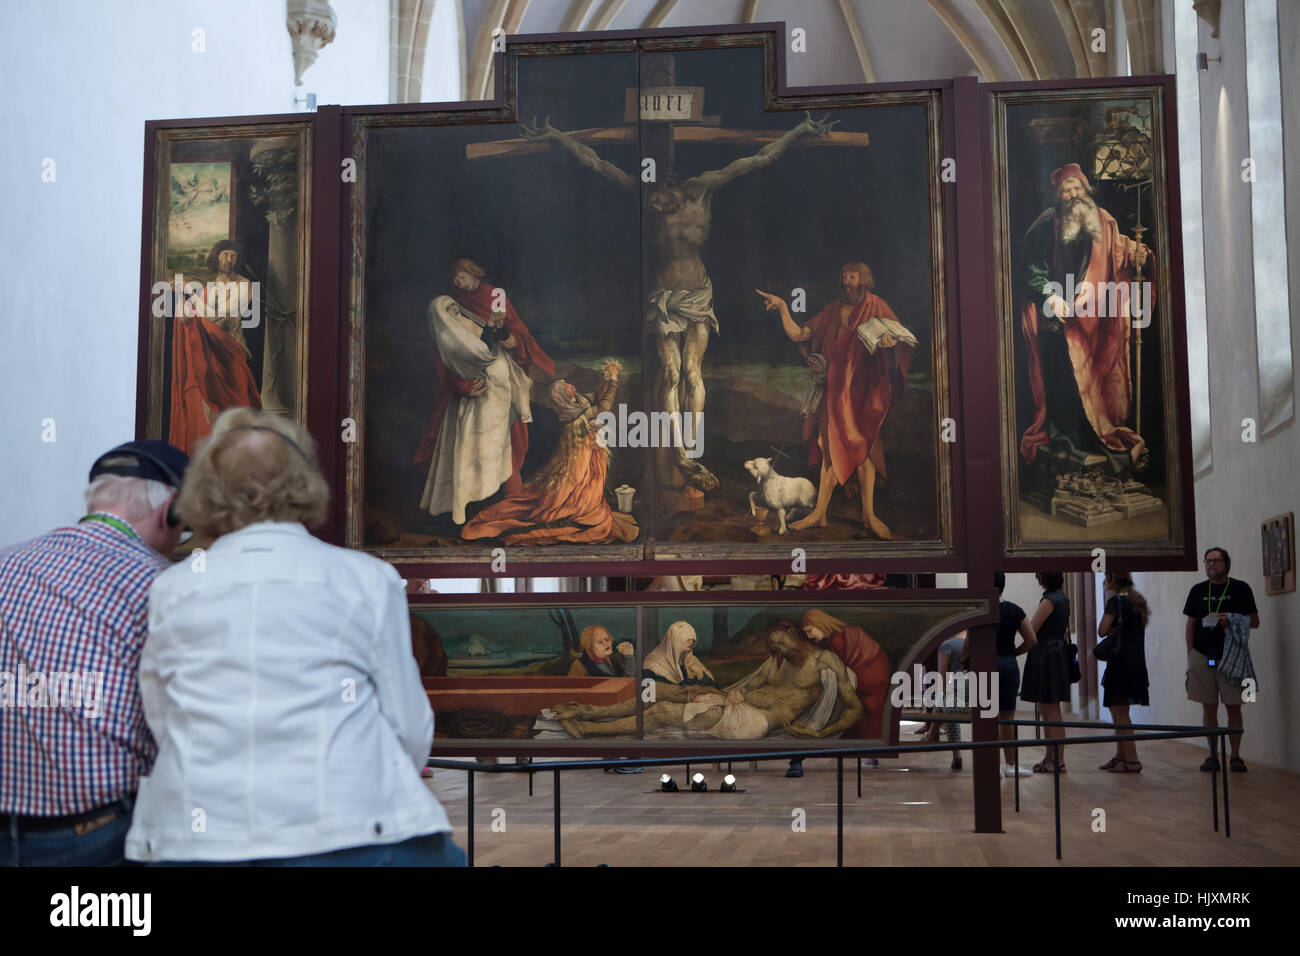 Visitors in front of the Isenheim Altarpiece (1512–1516) by German Renaissance painter Matthias Grunewald displayed in the Musee d'Unterlinden (Unterlinden Museum) in Colmar, Alsace, France. First view of the Isenheim Altarpiece with Crucifixion framed by the martyrdom of Saint Sebastian on the left, and by Saint Anthony the Great on the right. Stock Photo